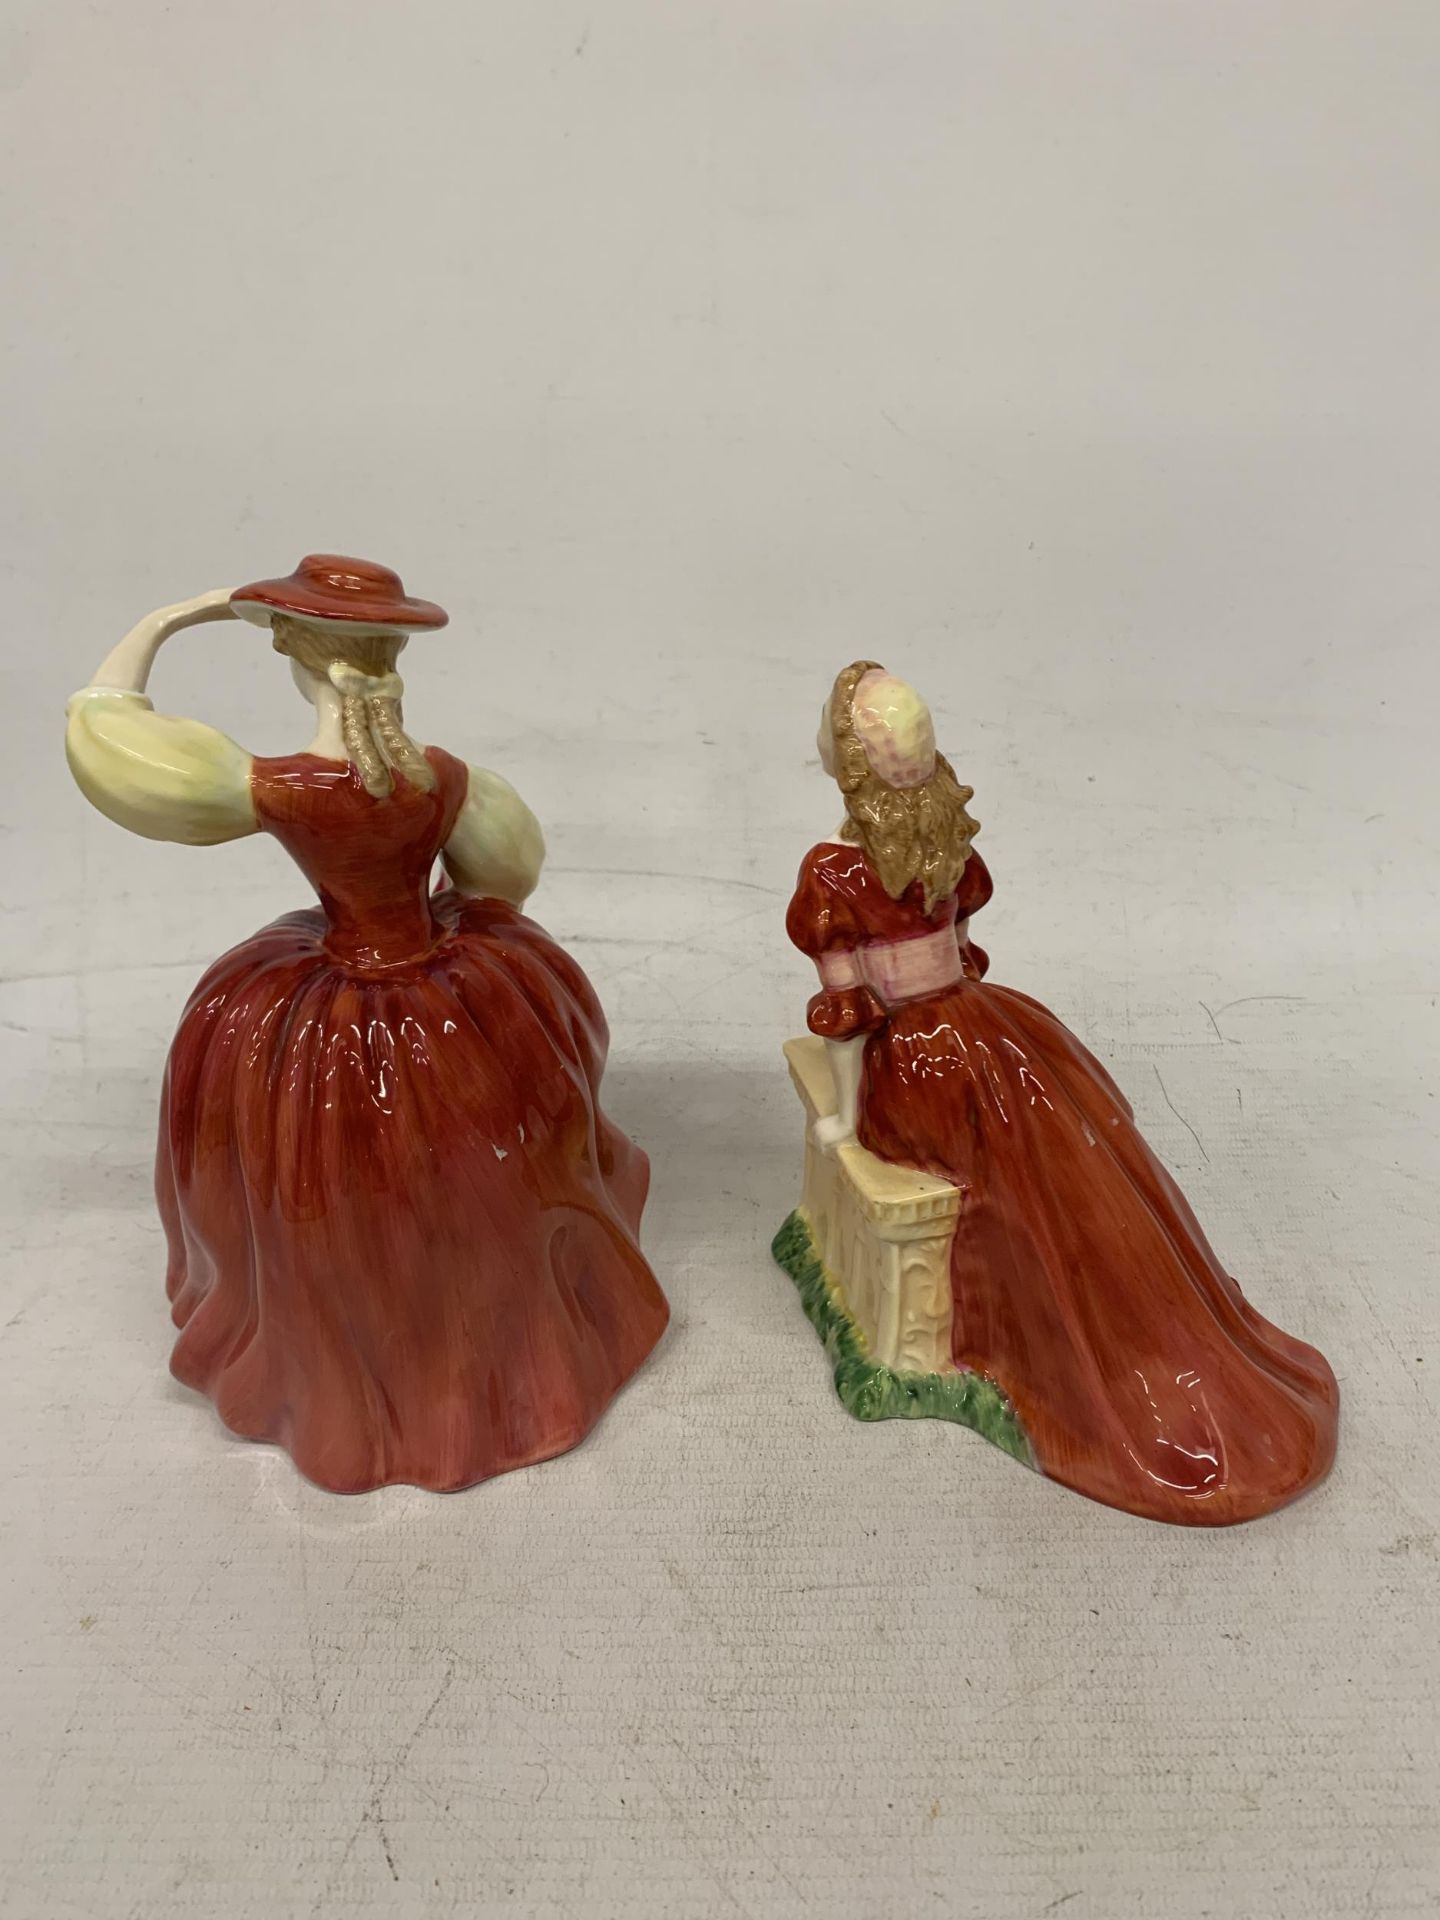 TWO ROYAL DOULTON FIGURINES "BUTTERCUP" AND "JUDITH" - Image 2 of 4